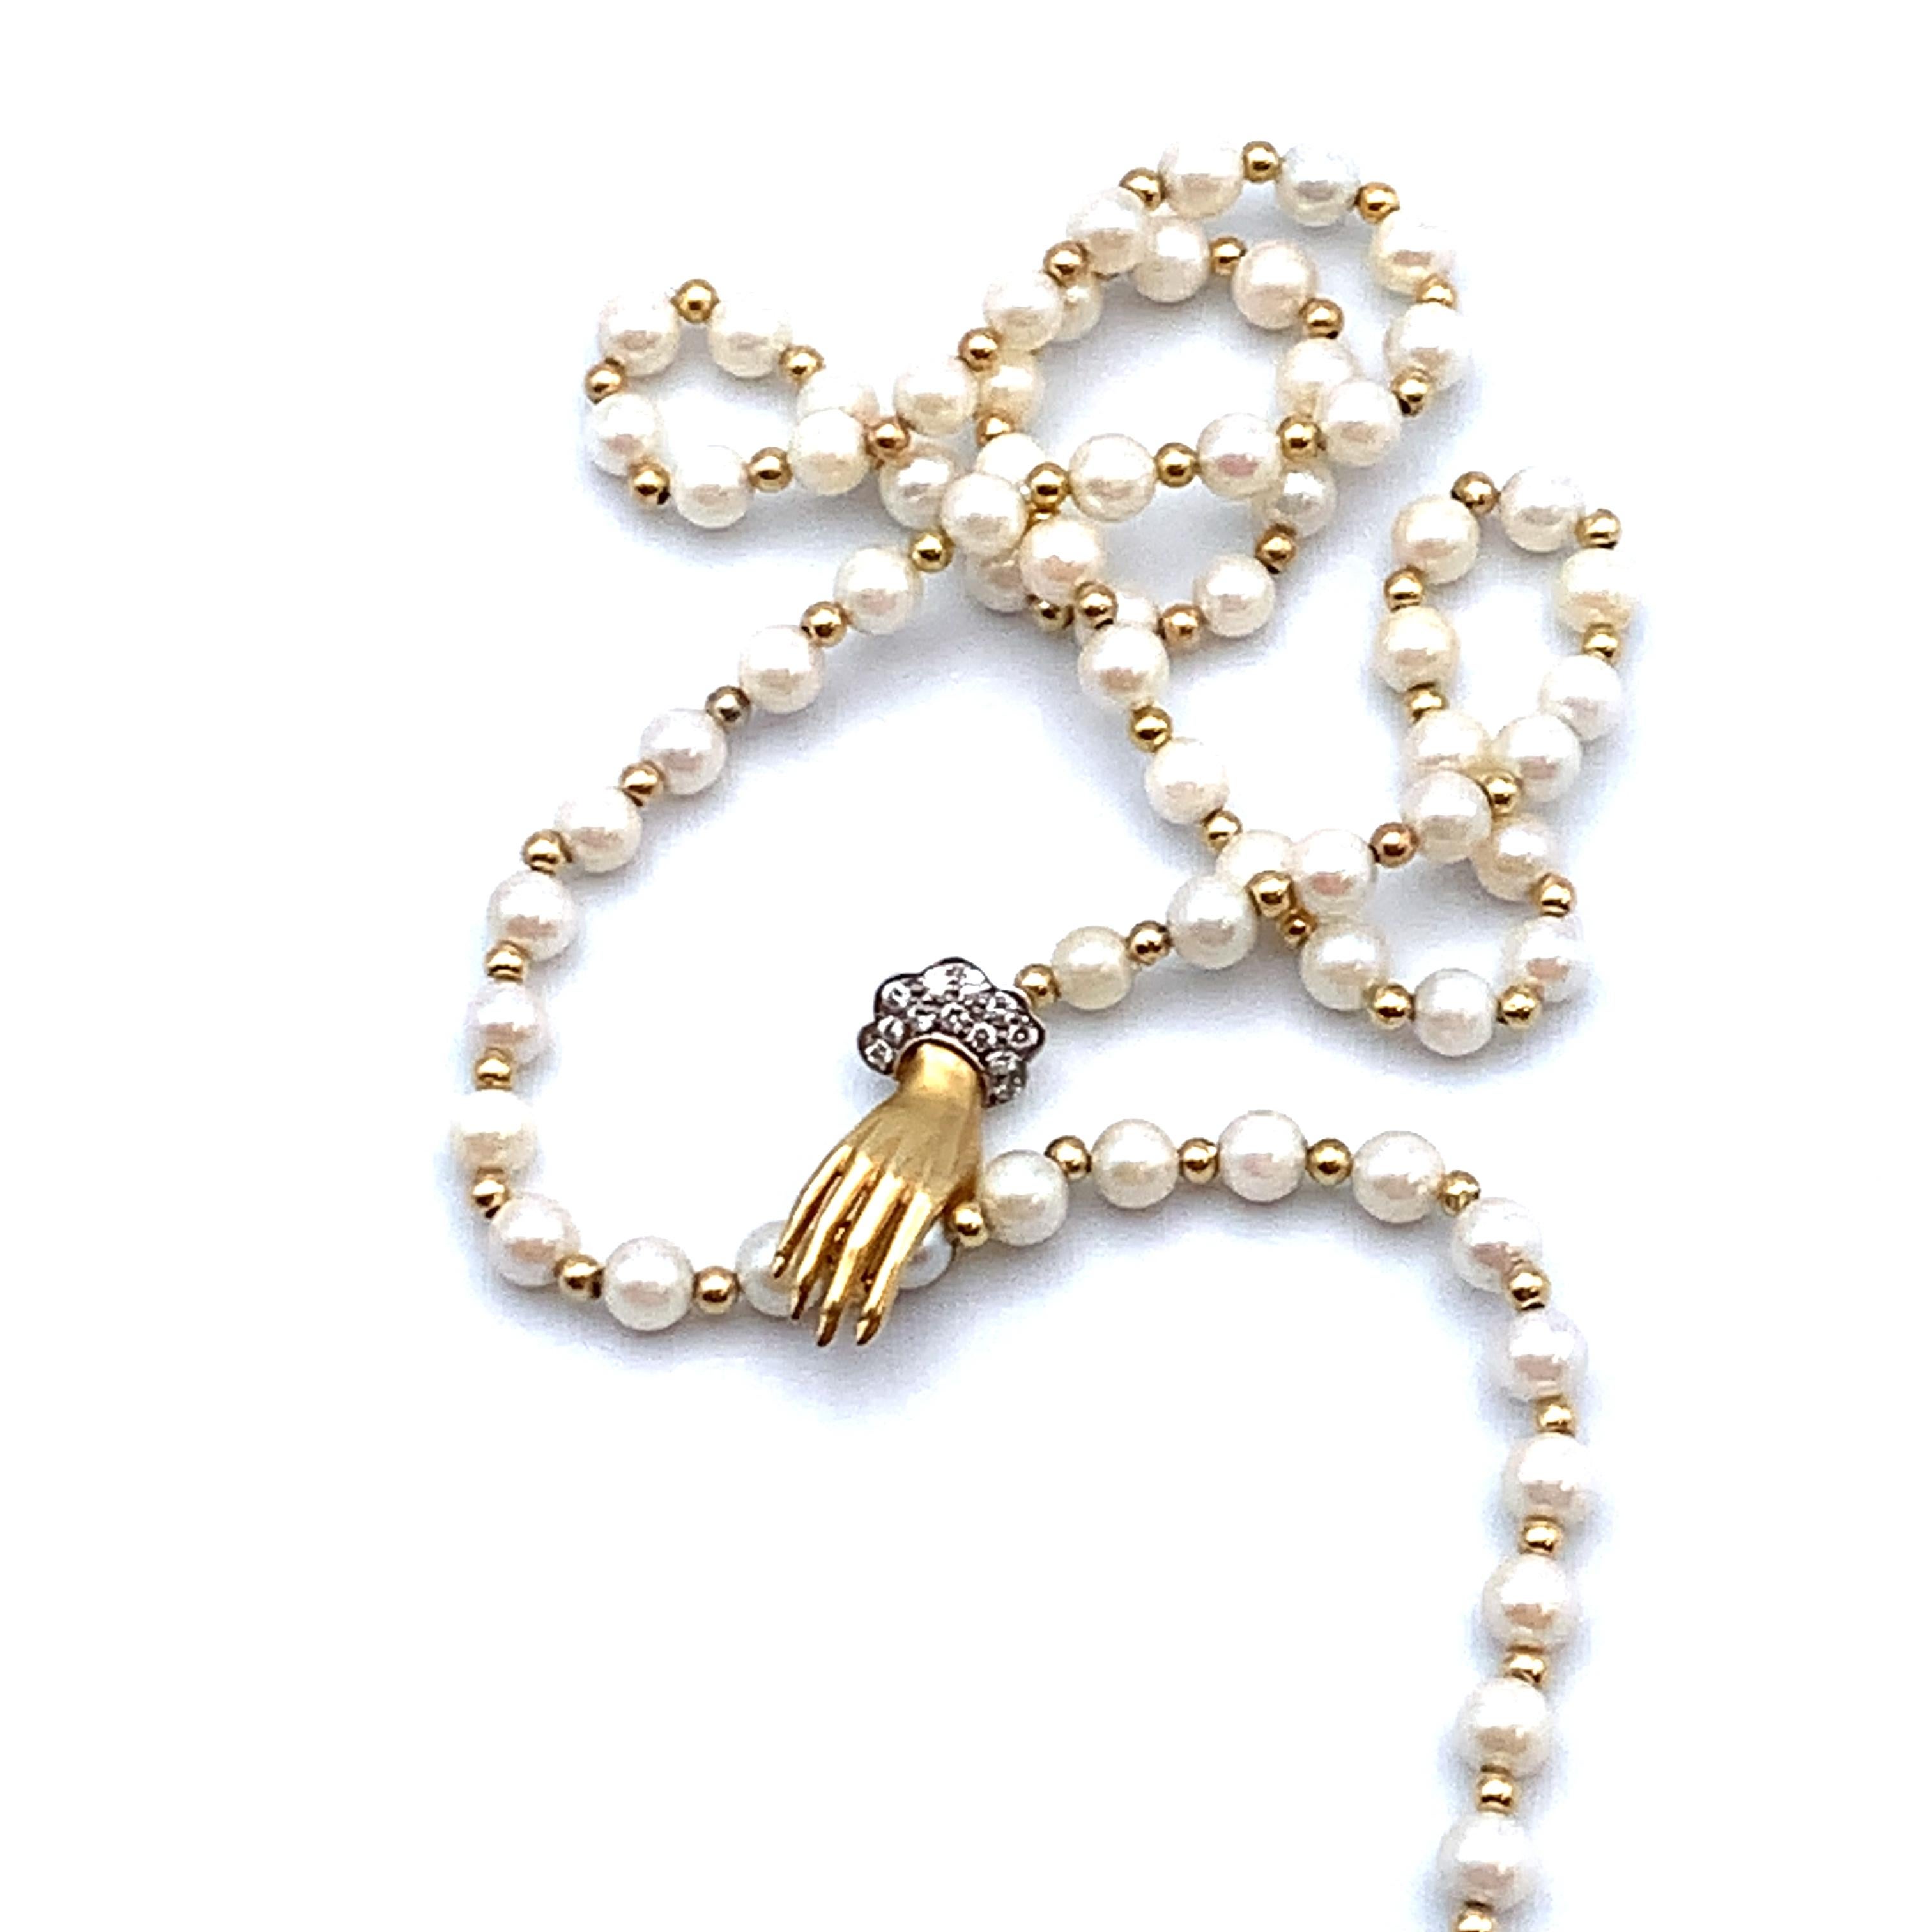 Lariat necklace set with alternating pearls and gold beads.  It fastens with a well-defined figural 